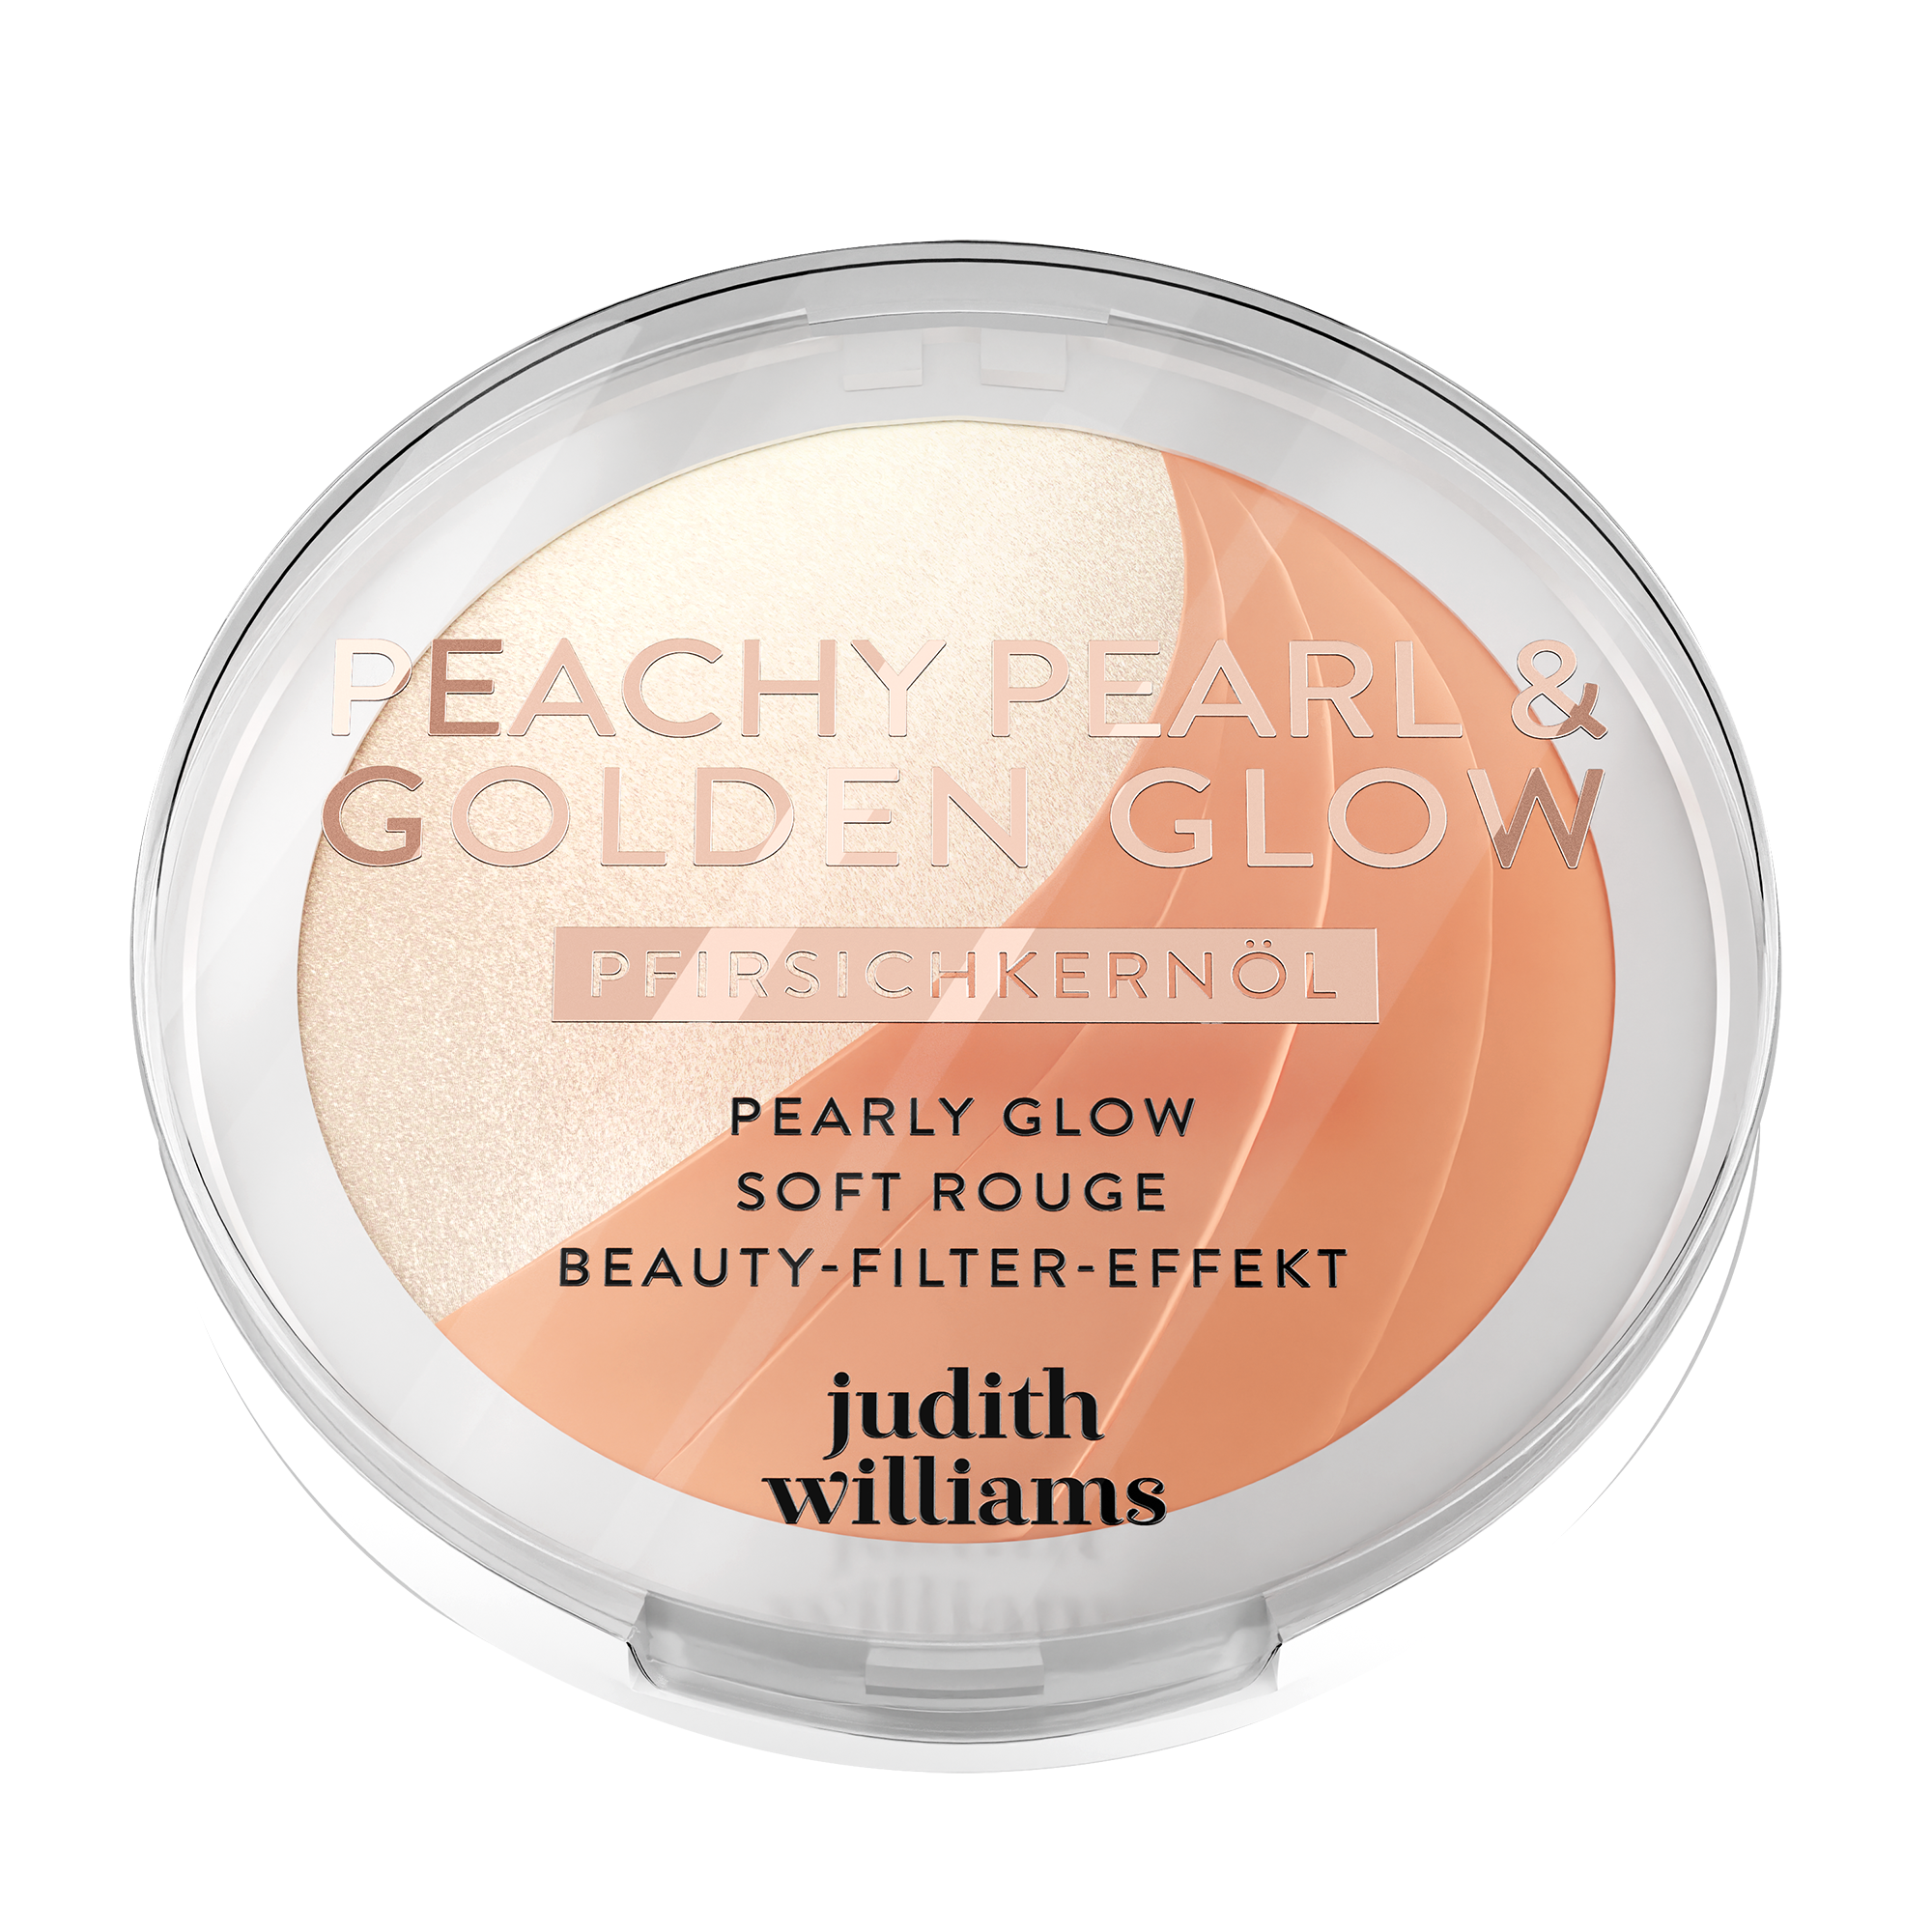 Highlighter | Make-up | Peachy Pearl & Golden Glow | Judith Williams